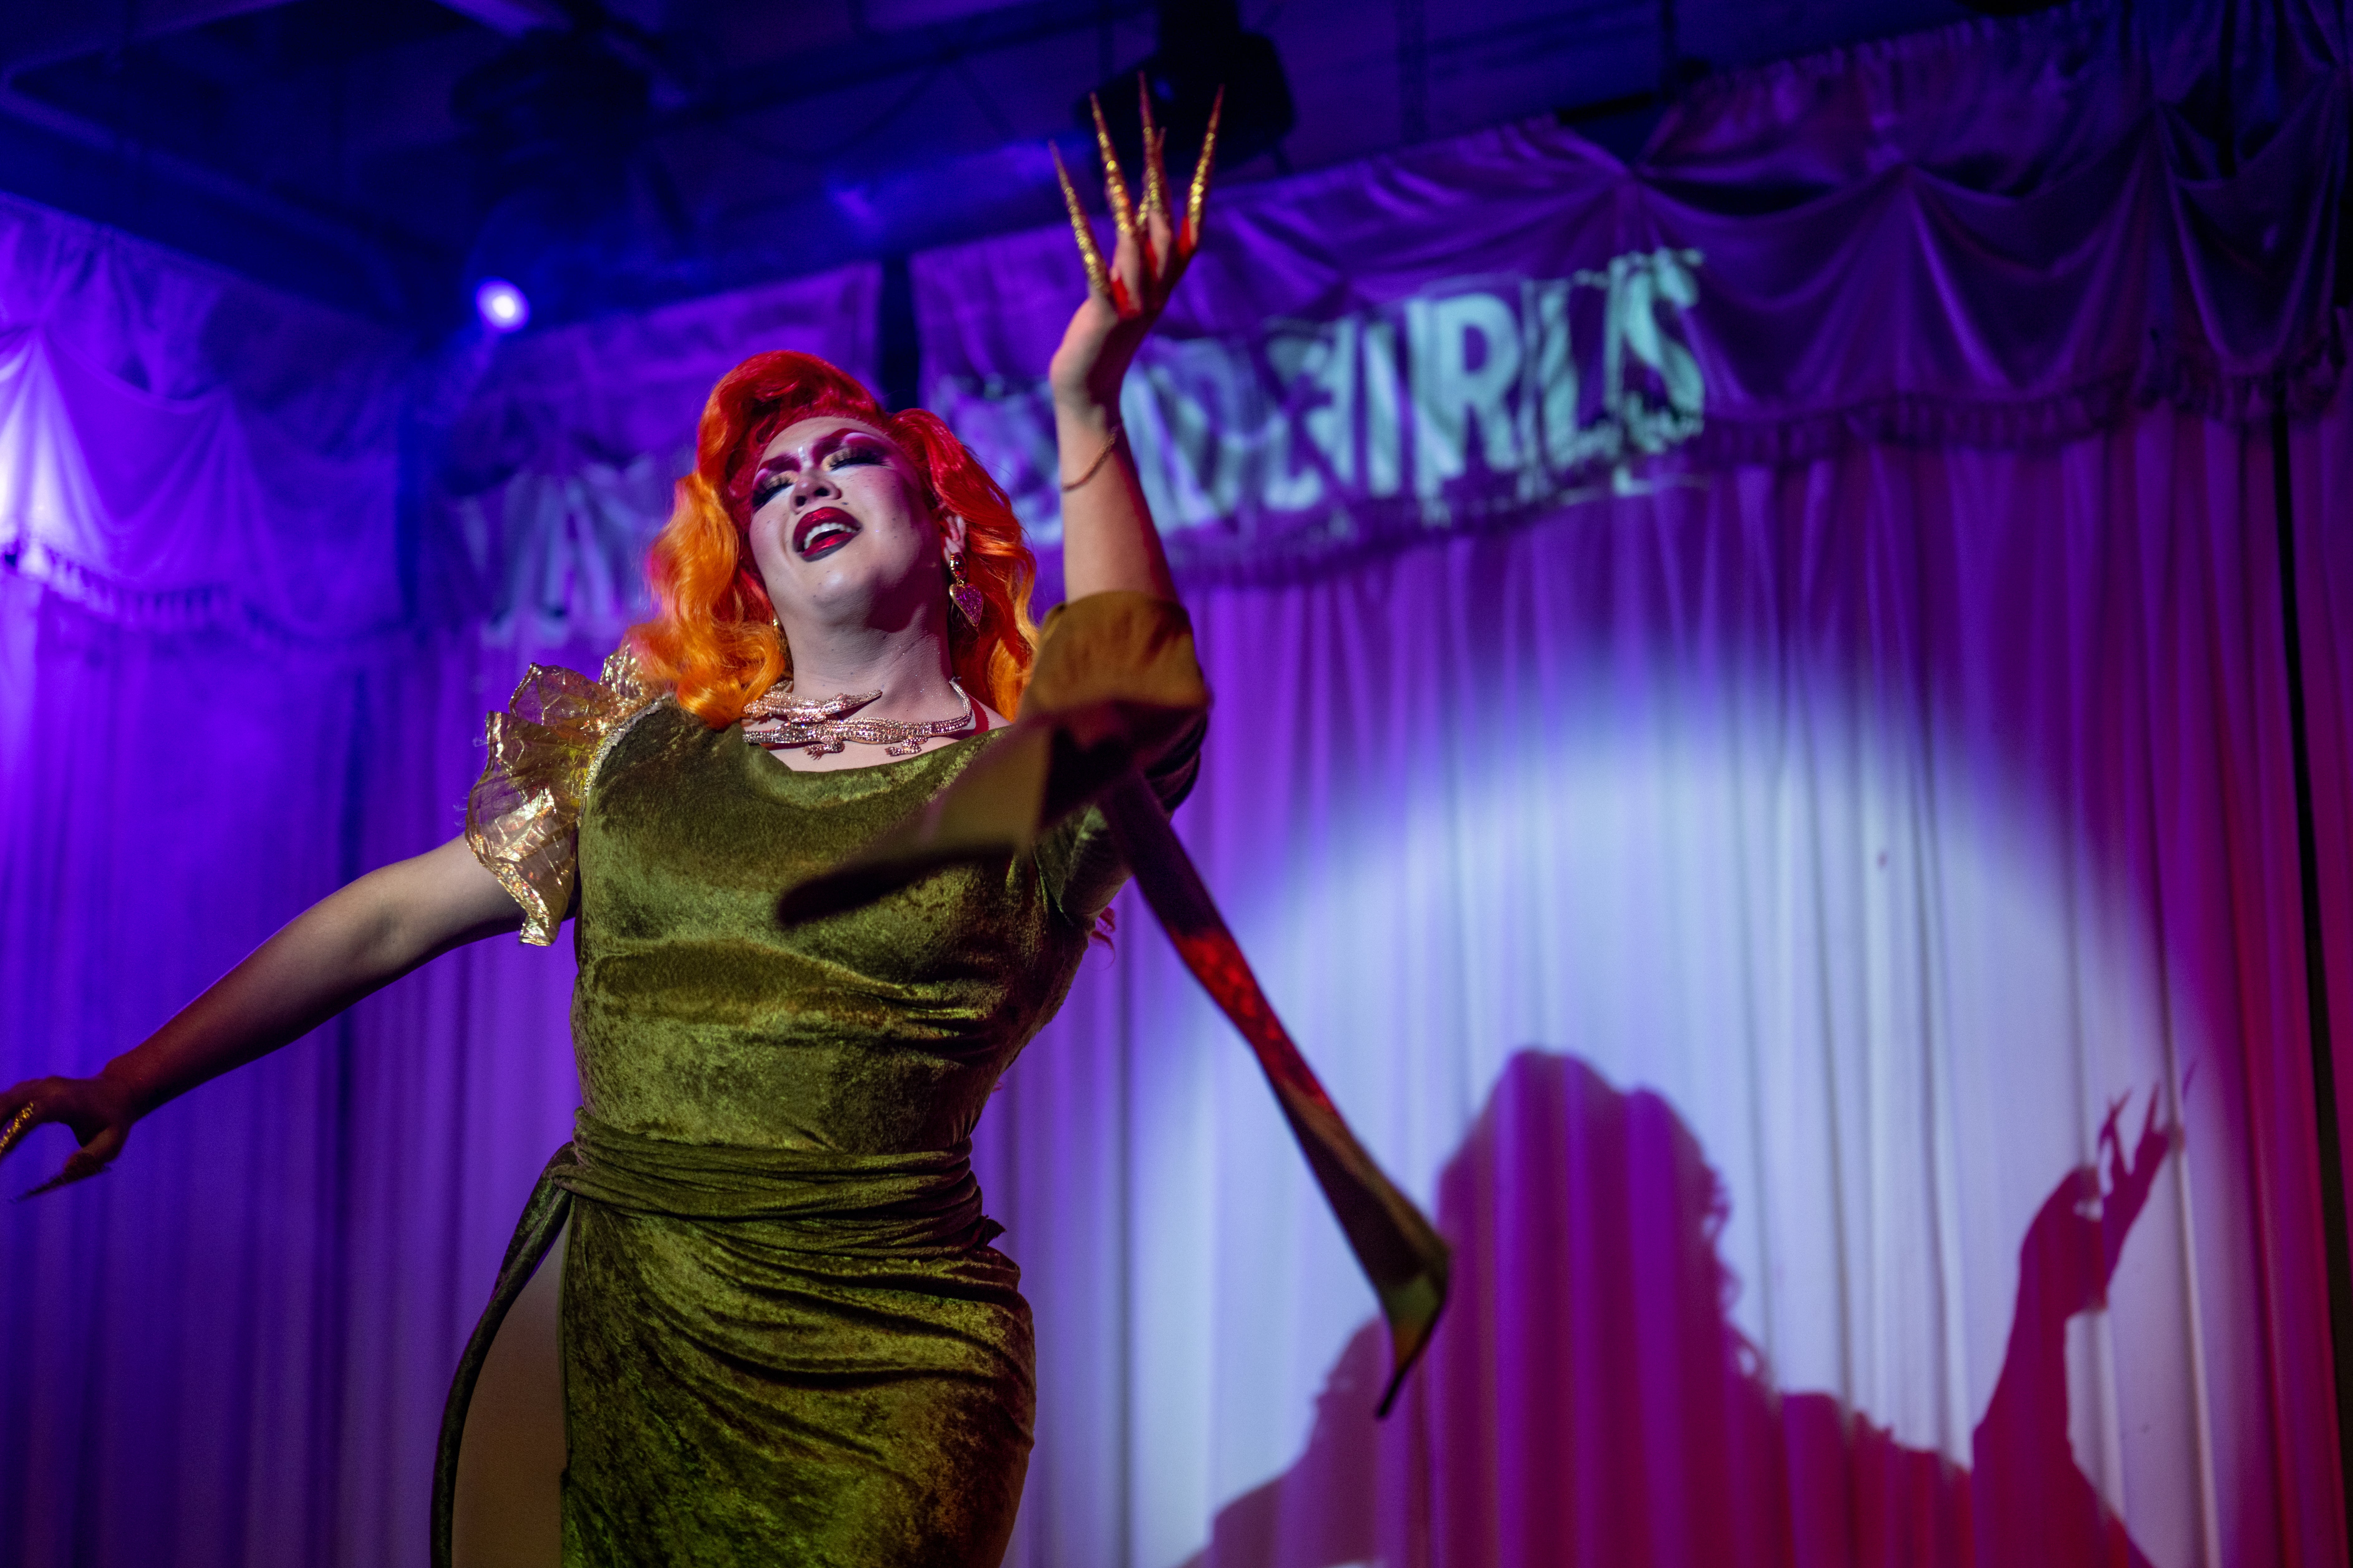 A Drag Queen performs during a show at the Swan Dive nightclub on March 20, 2023 in Austin, Texas.